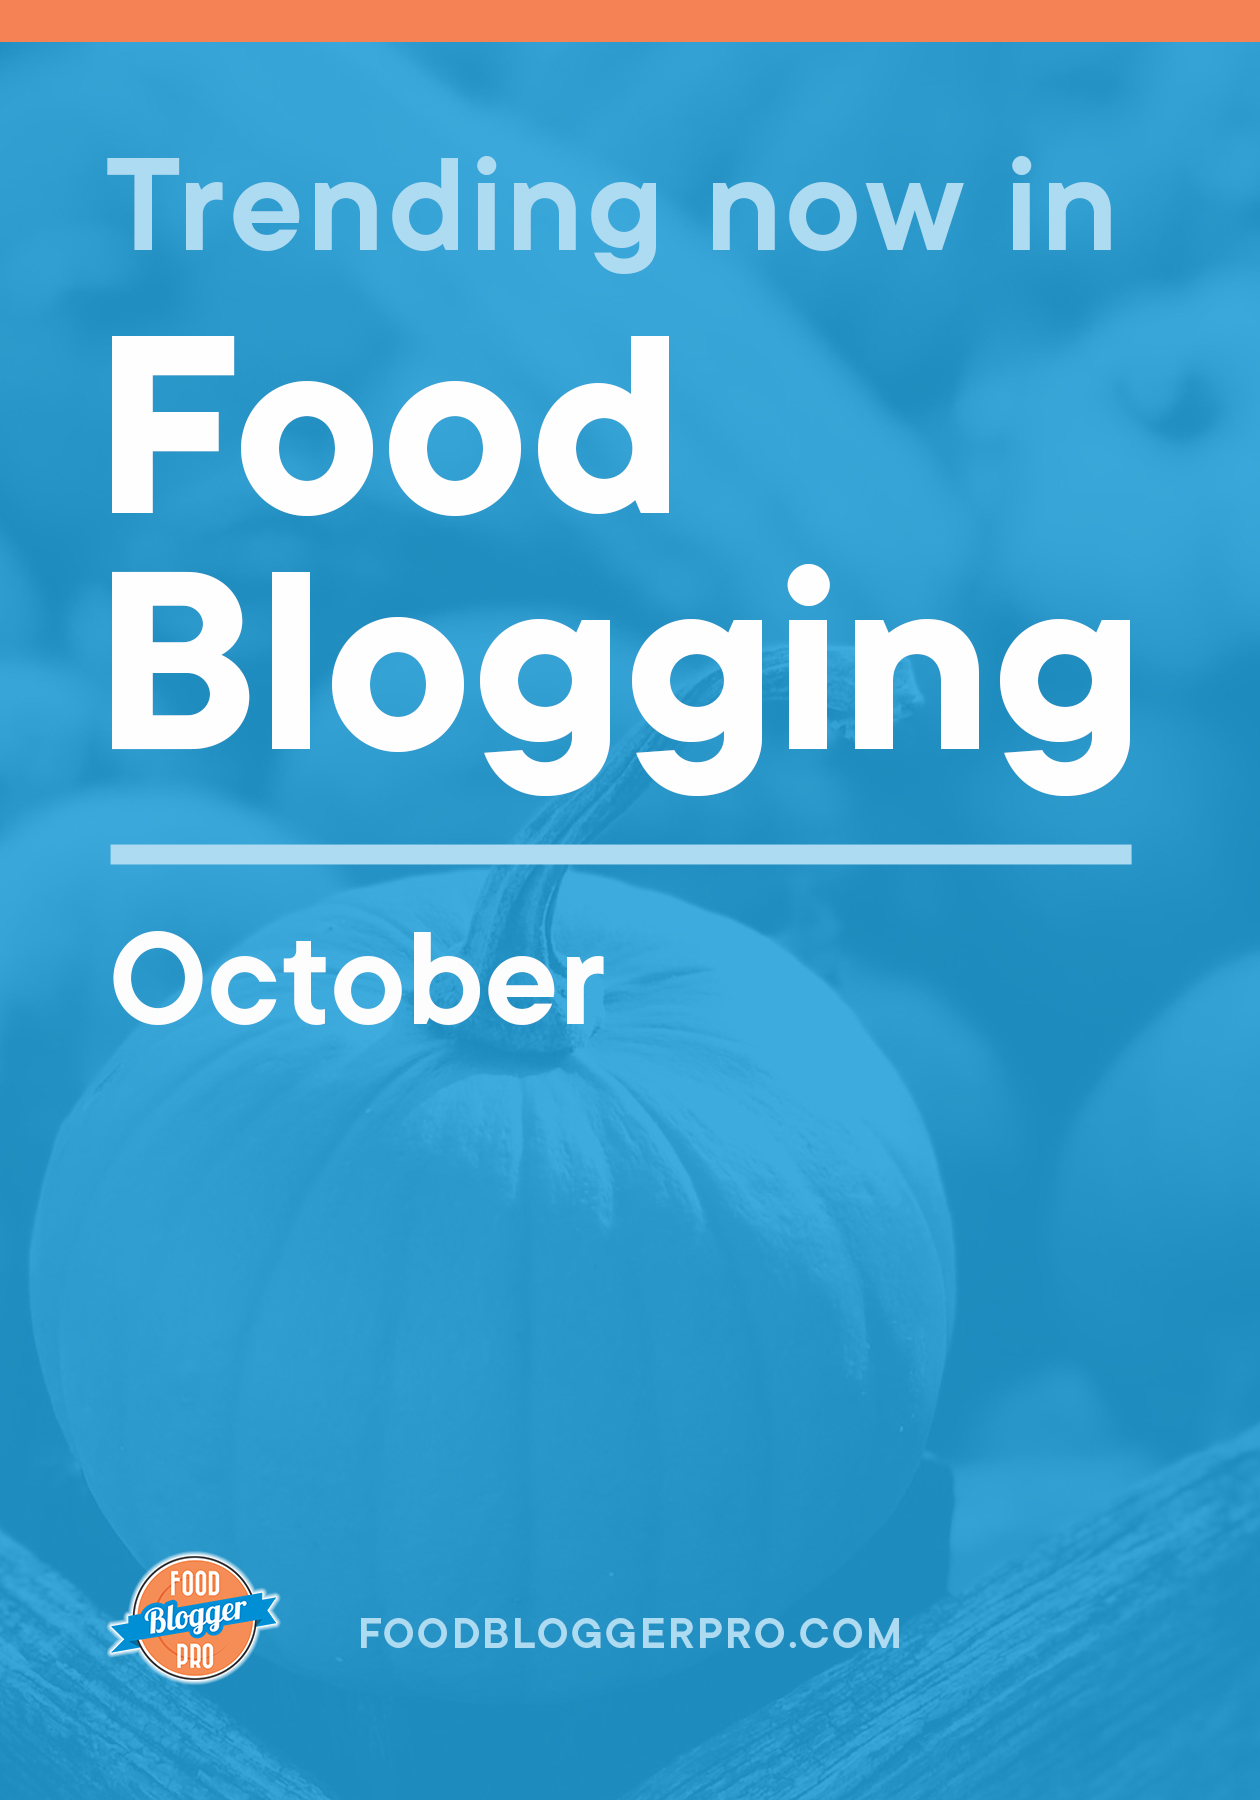 Blue graphic of pumpkins that reads 'Trending Now in Food Blogger - October' with the Food Blogger Pro logo